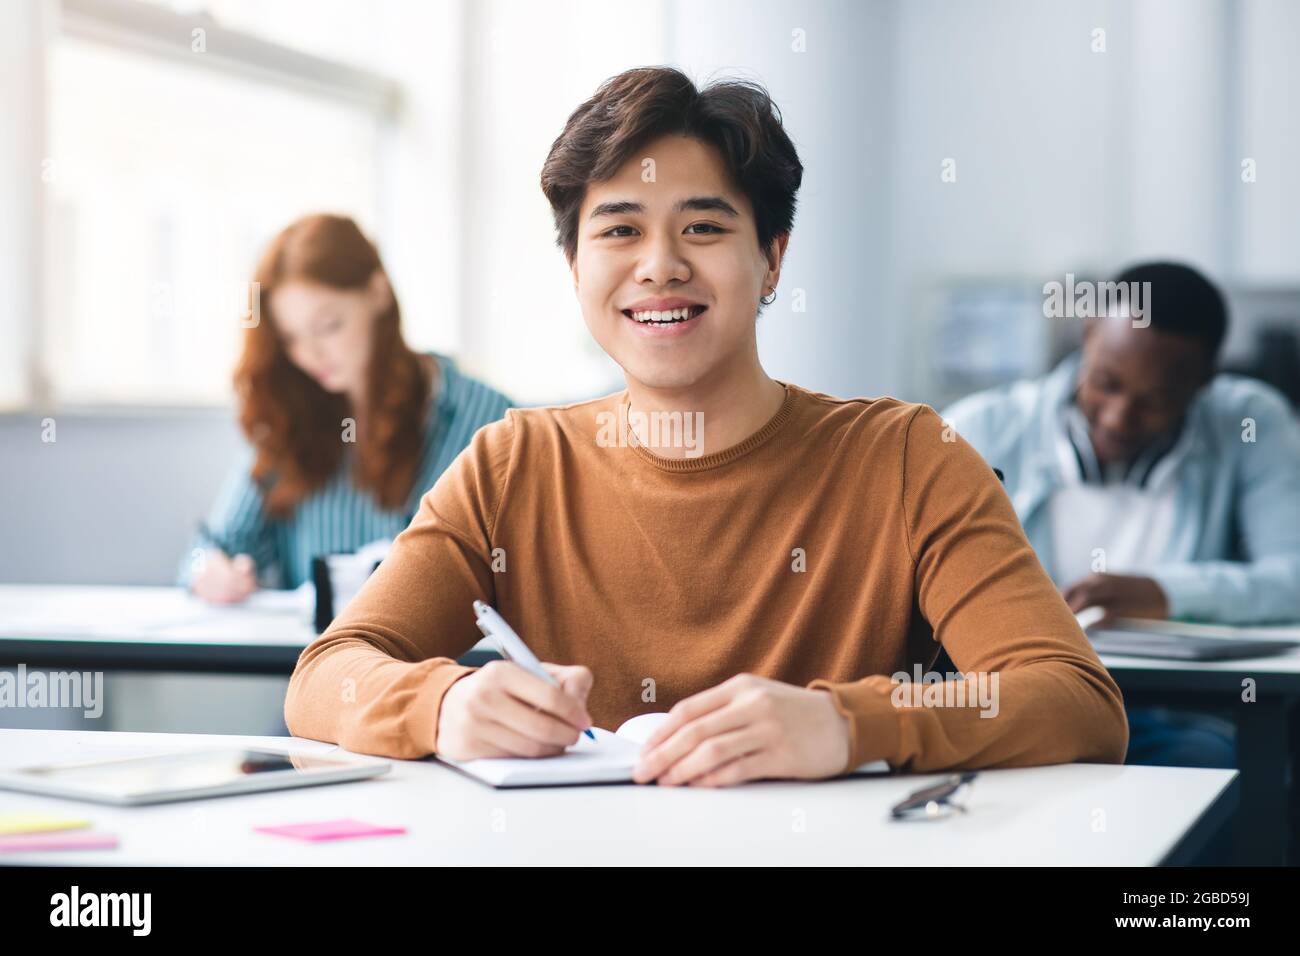 Asian male student sitting at desk writing in classroom Stock Photo